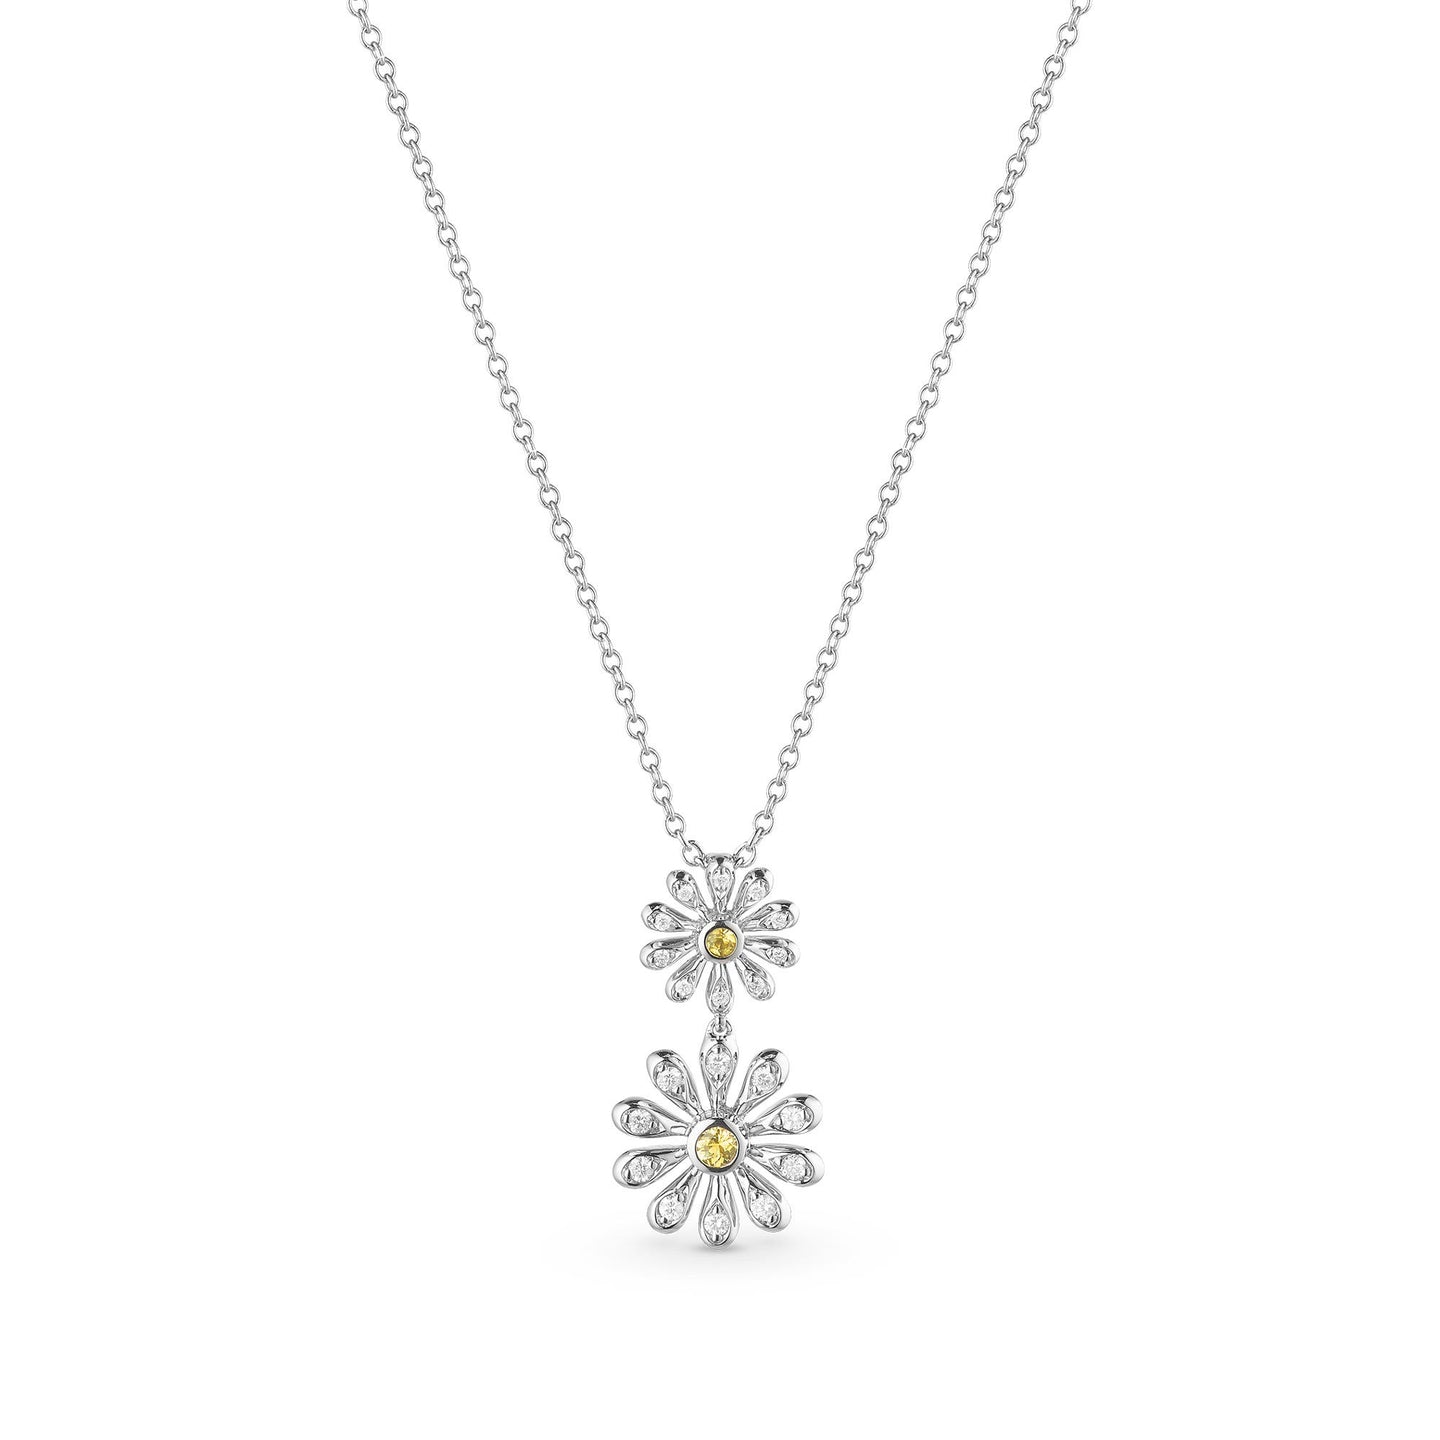 Mini Daisy Double Pendant in 18ct White Gold with Yellow Sapphire and Diamonds